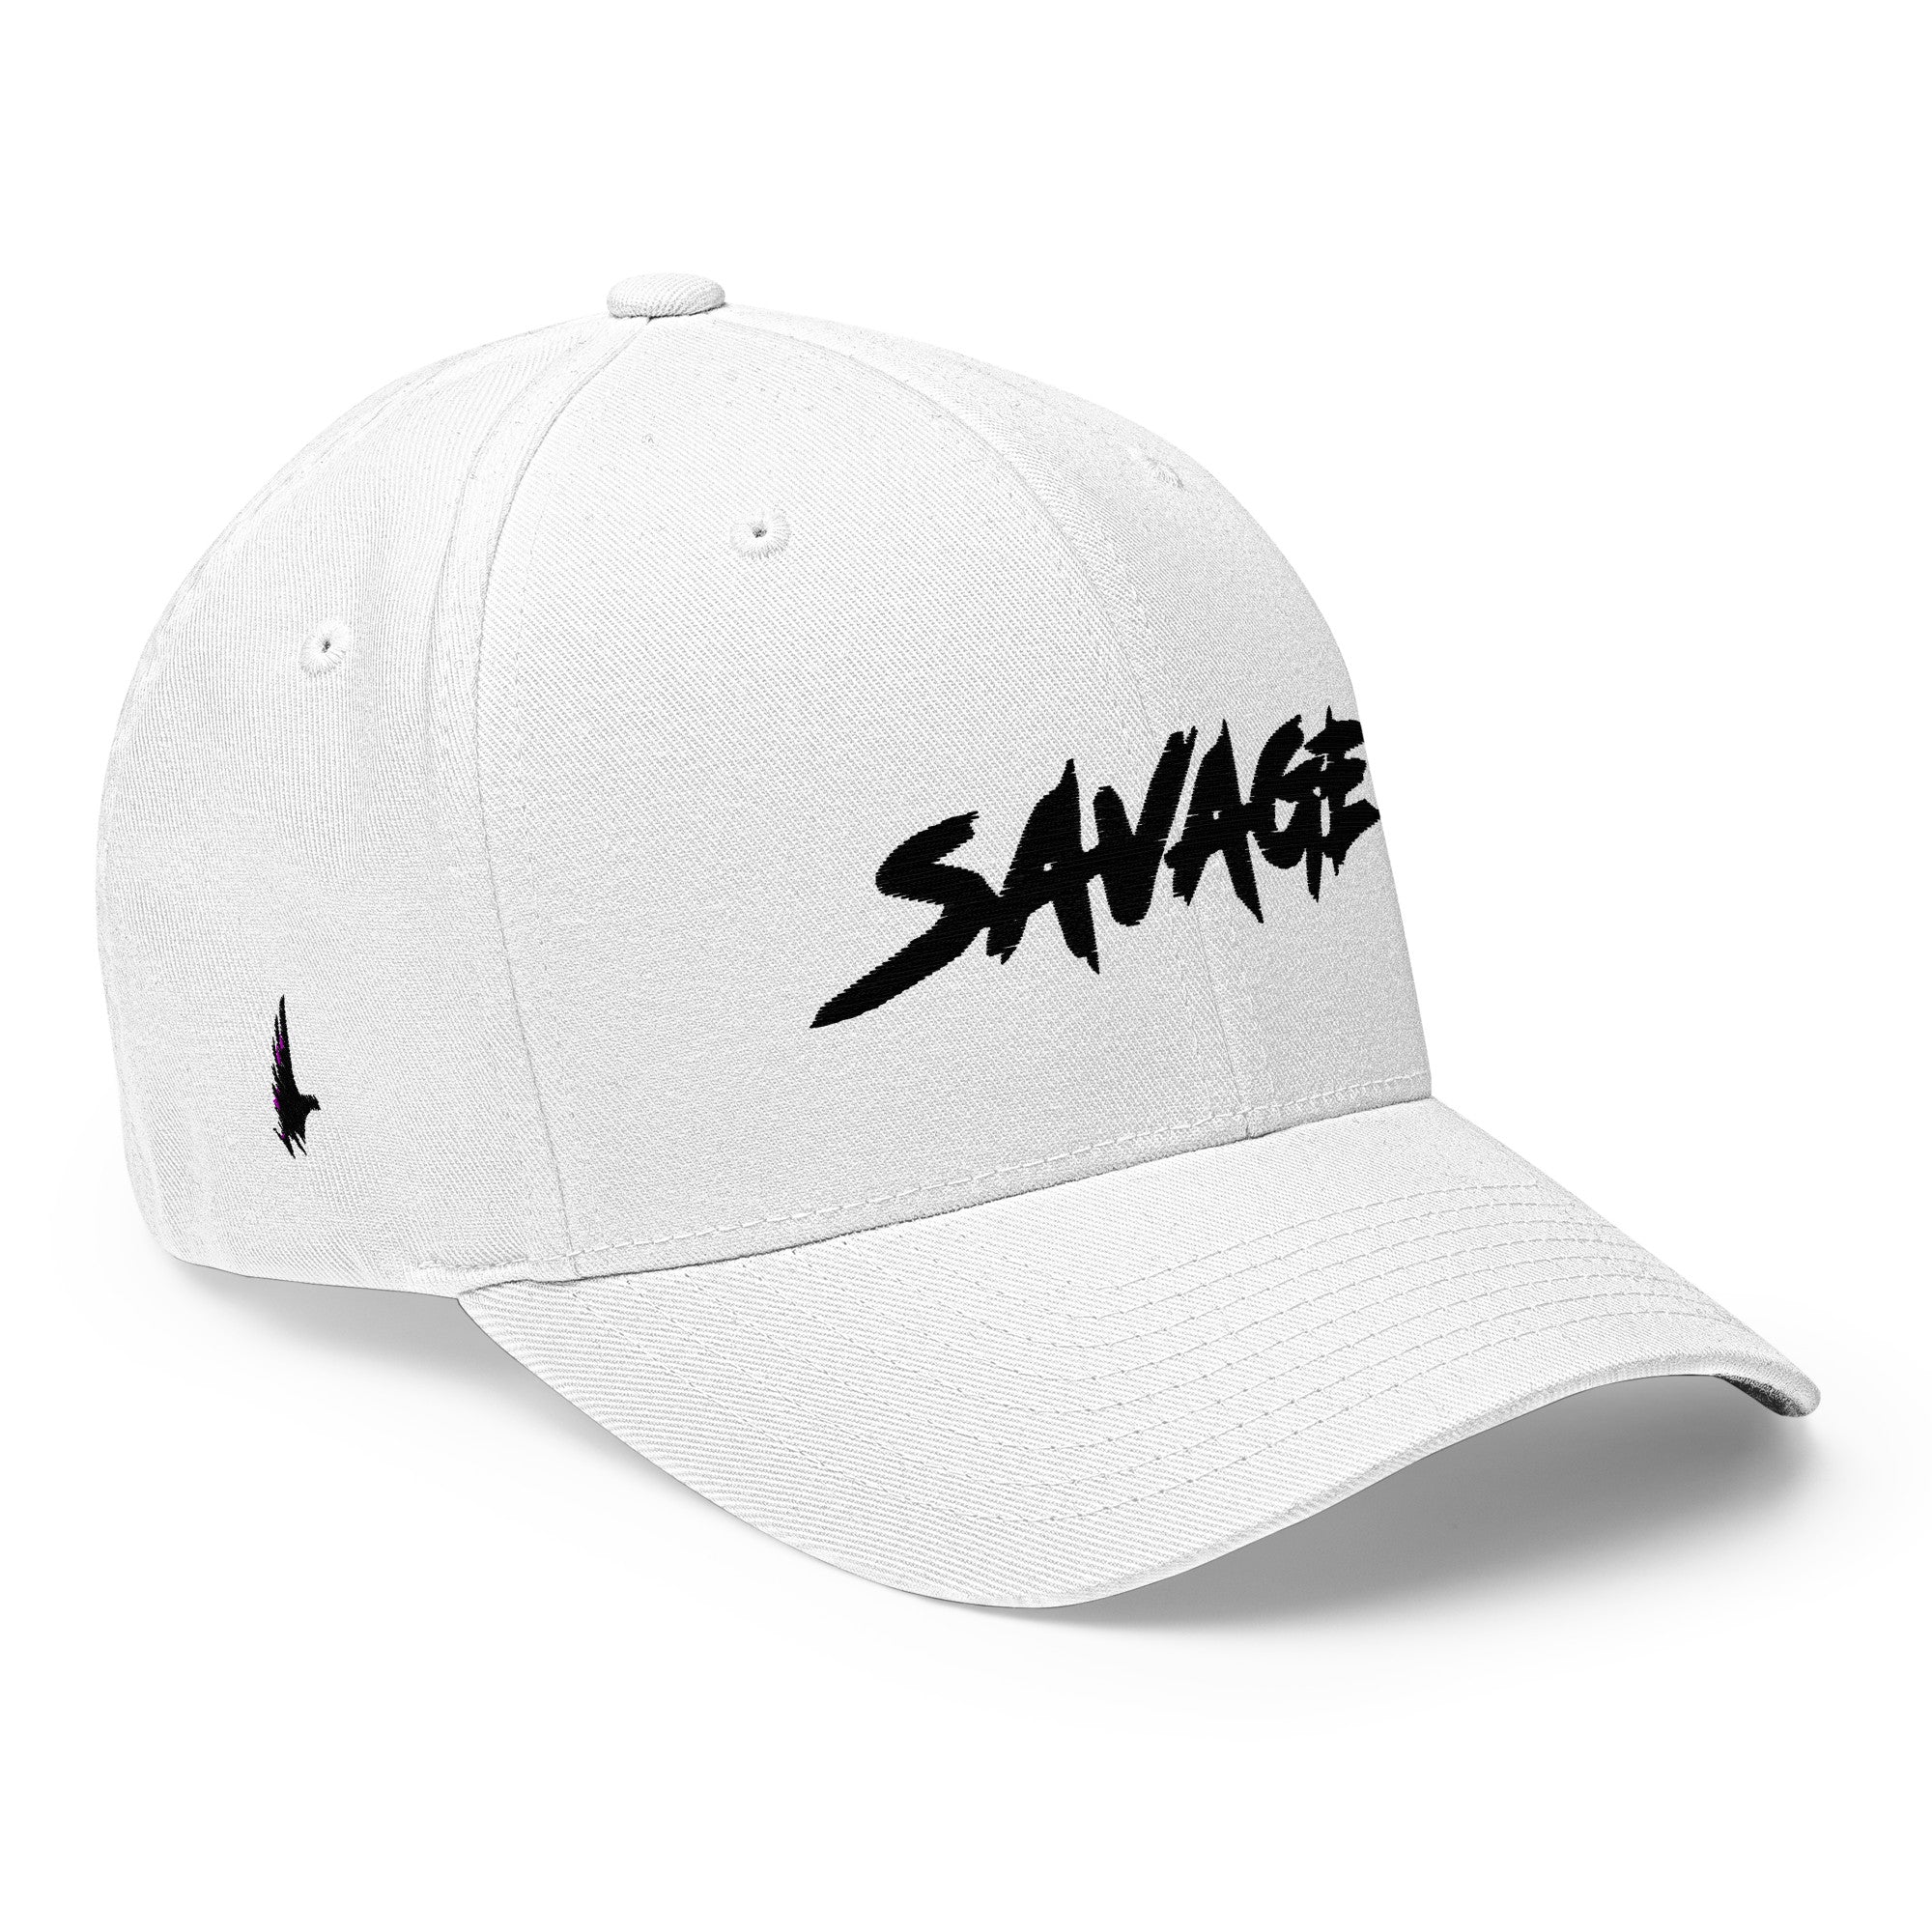 Savage Fitted Hat White - Loyalty Vibes